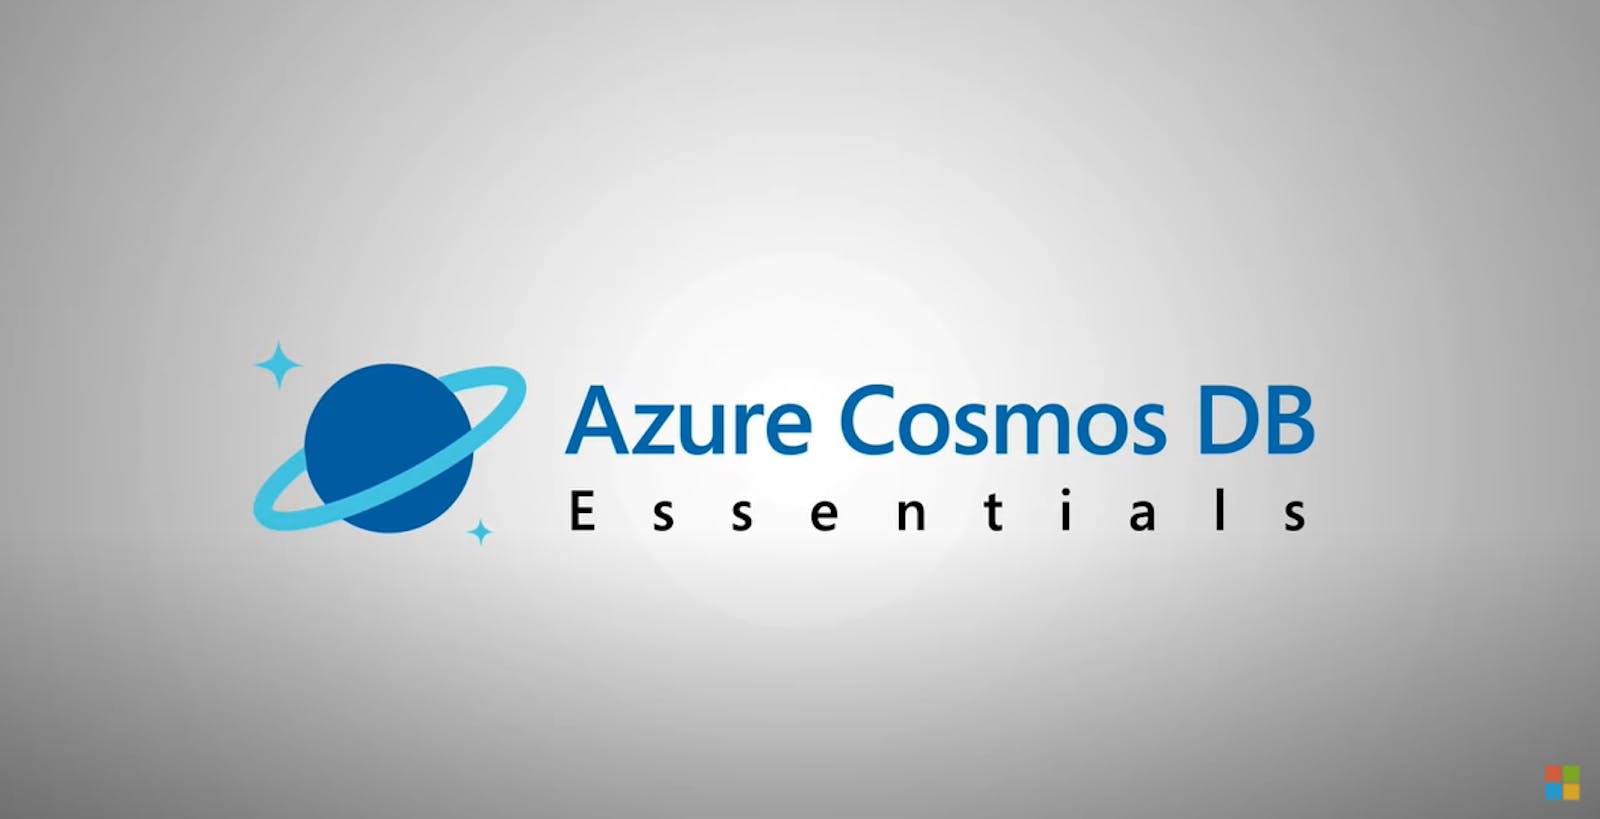 Unleashing the Cosmos: A Journey into the Azure Cosmos DB Universe